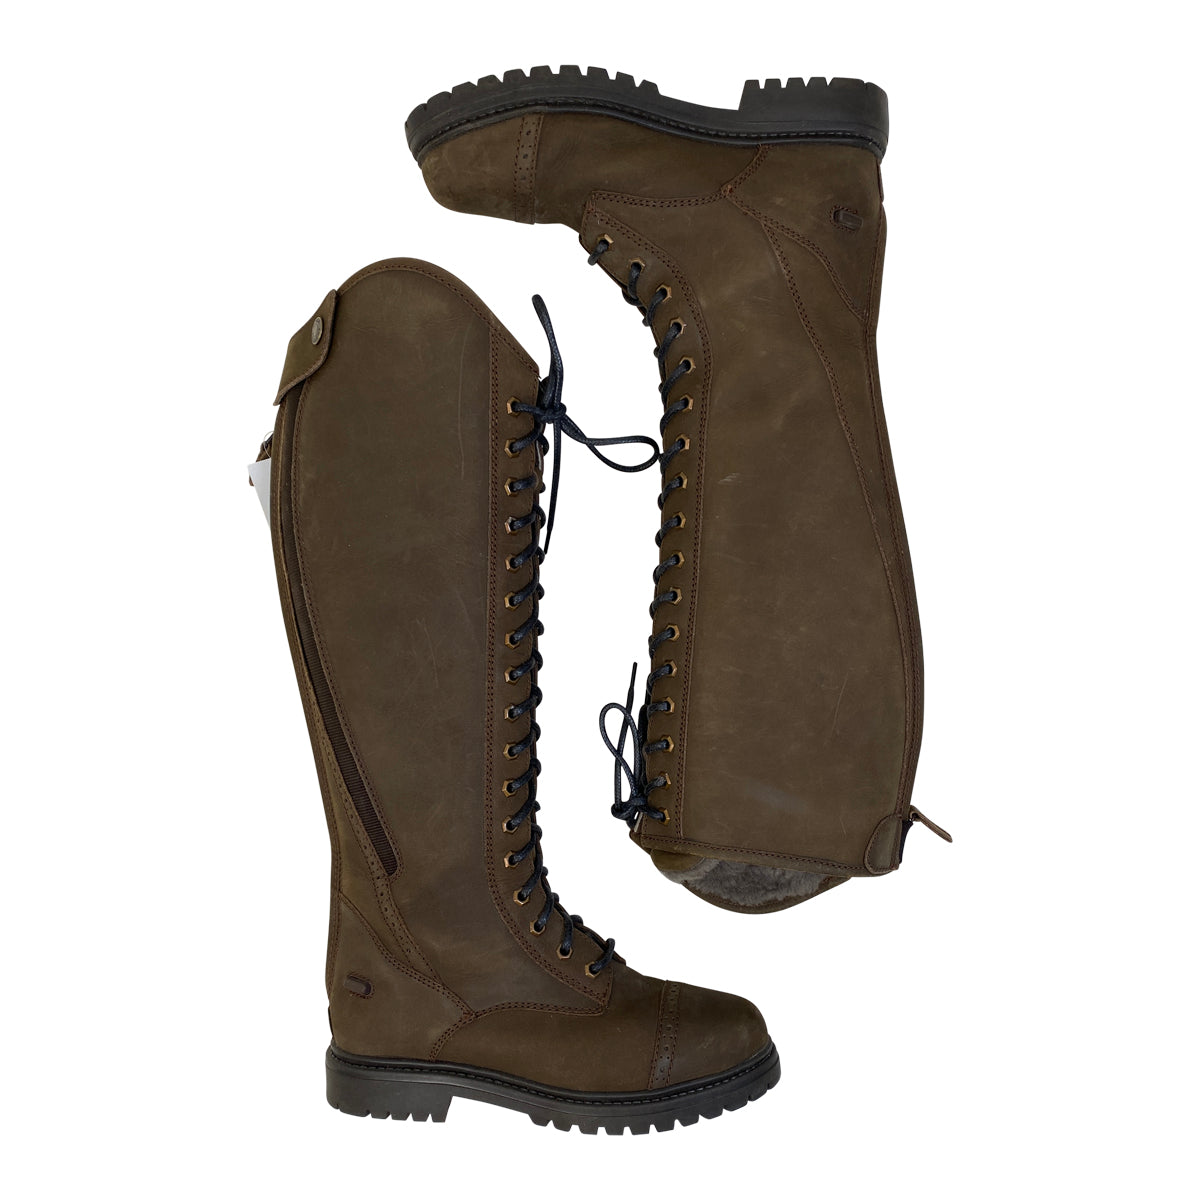 Dover Saddlery Tall Winter Boots in Brown